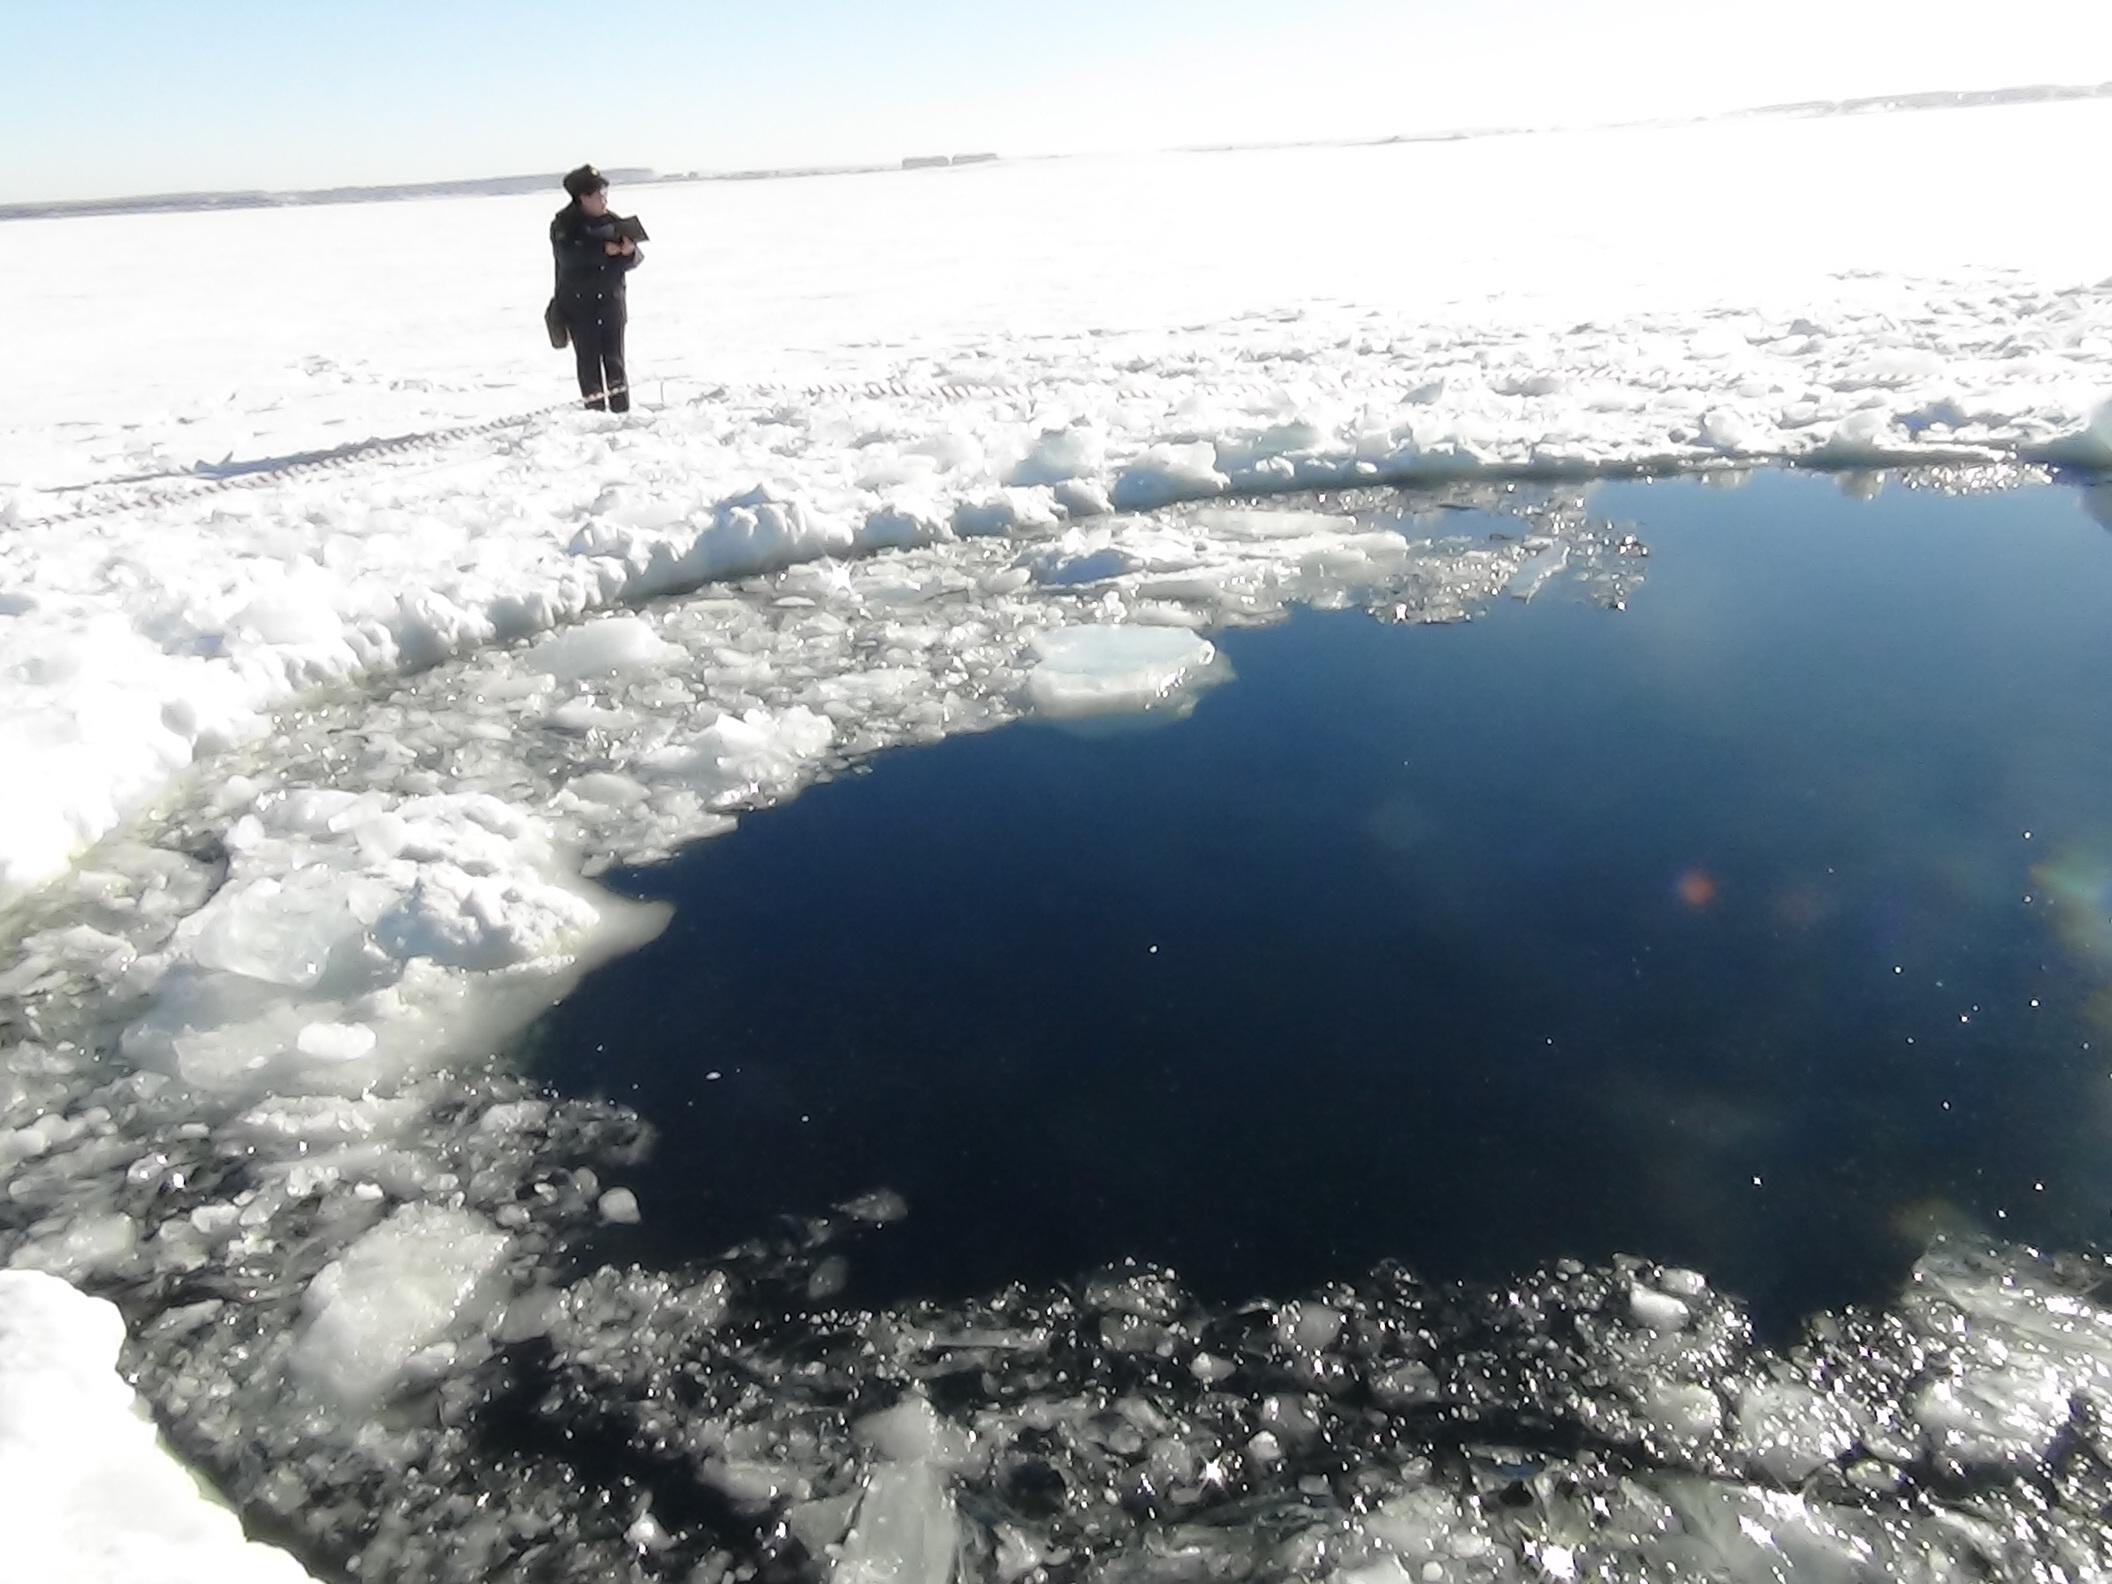 A hole in the Chebarkul Lake made by meteorite fragments. A meteorite hit Russia's Chelyabinsk region on February 15, 2013.